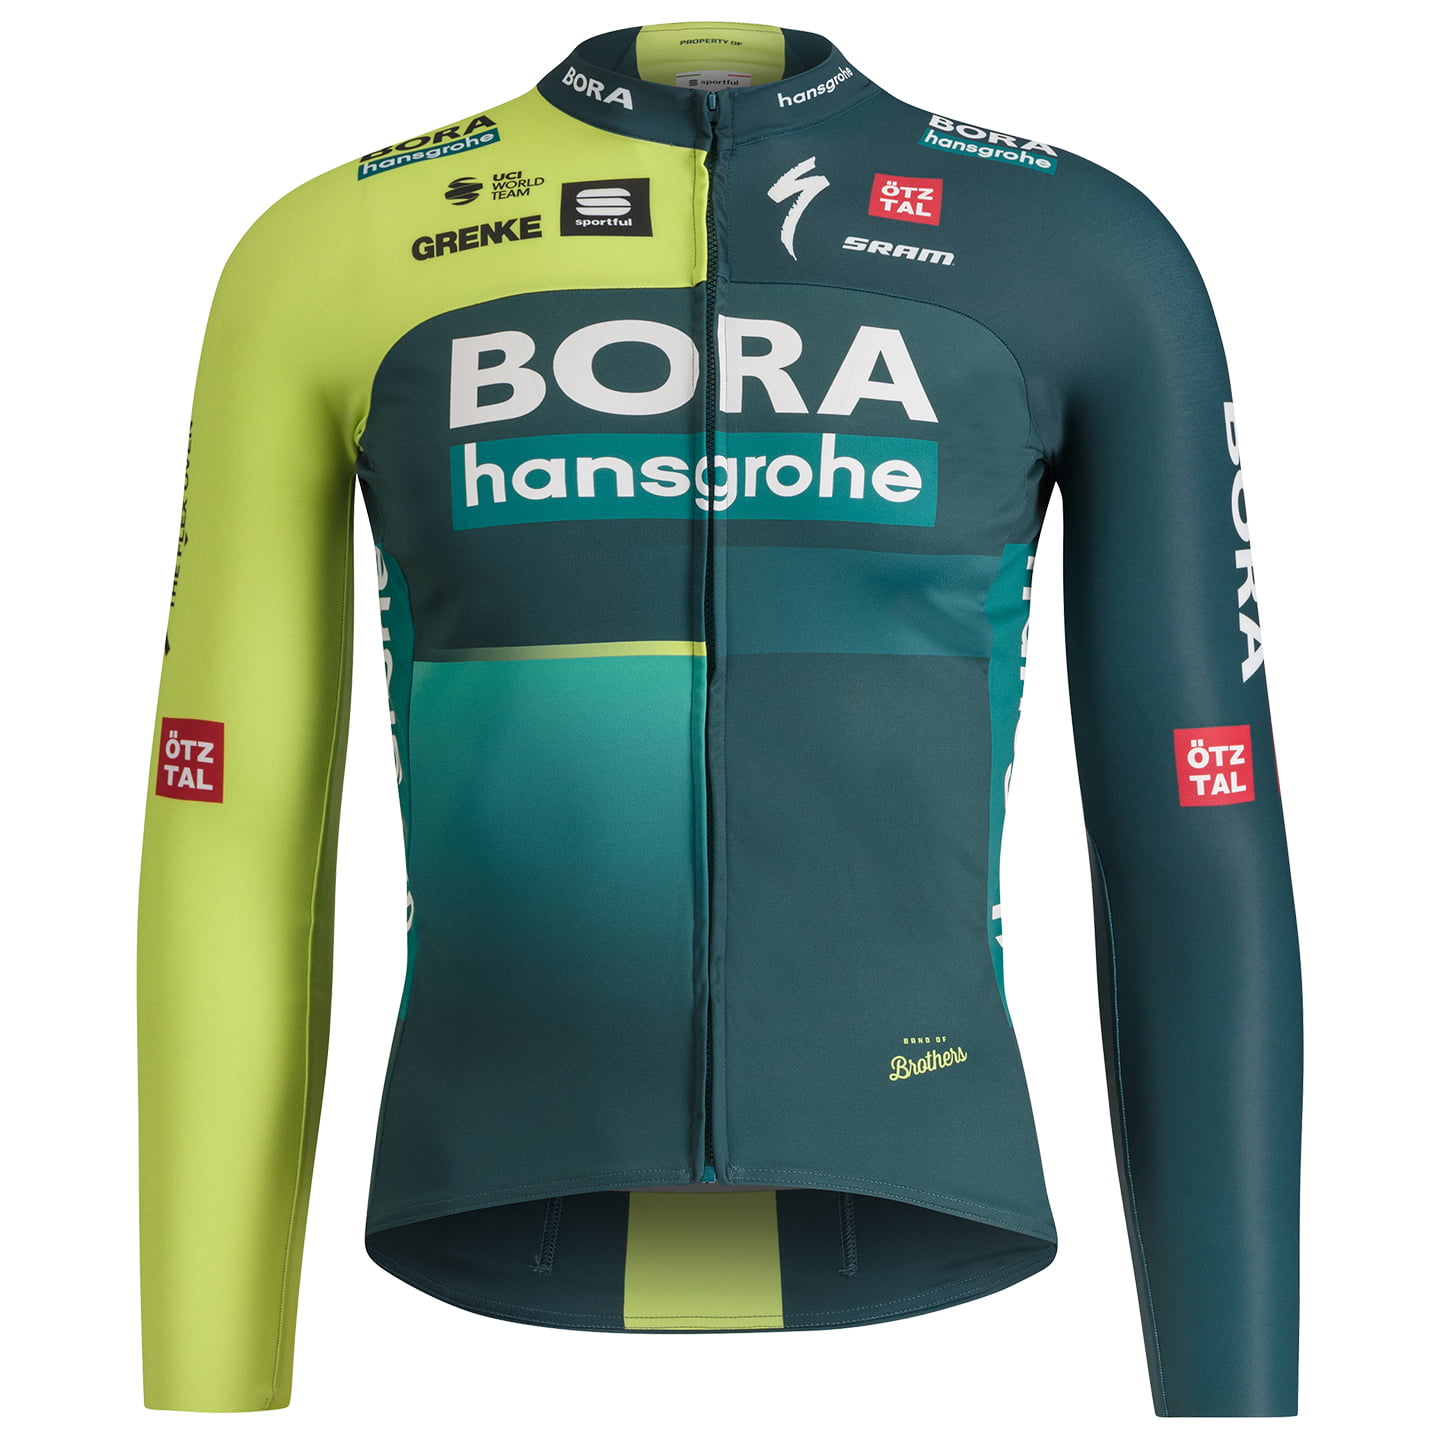 BORA-hansgrohe 2024 Long Sleeve Jersey, for men, size M, Cycle jersey, Cycling clothing